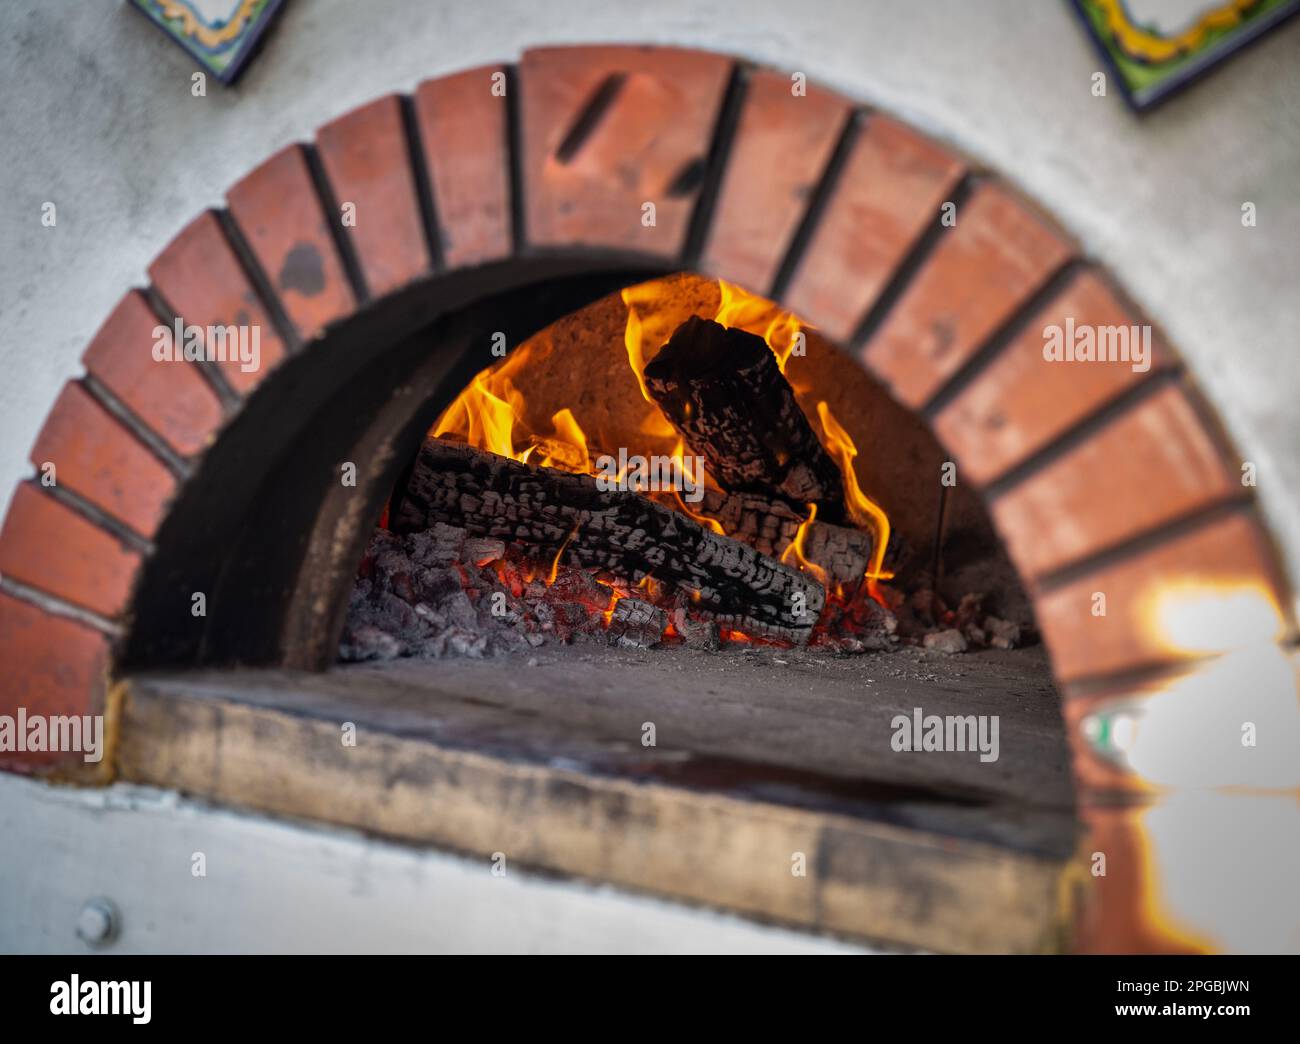 Brick Oven Pizza Cooker ready to place pizza in Stock Photo